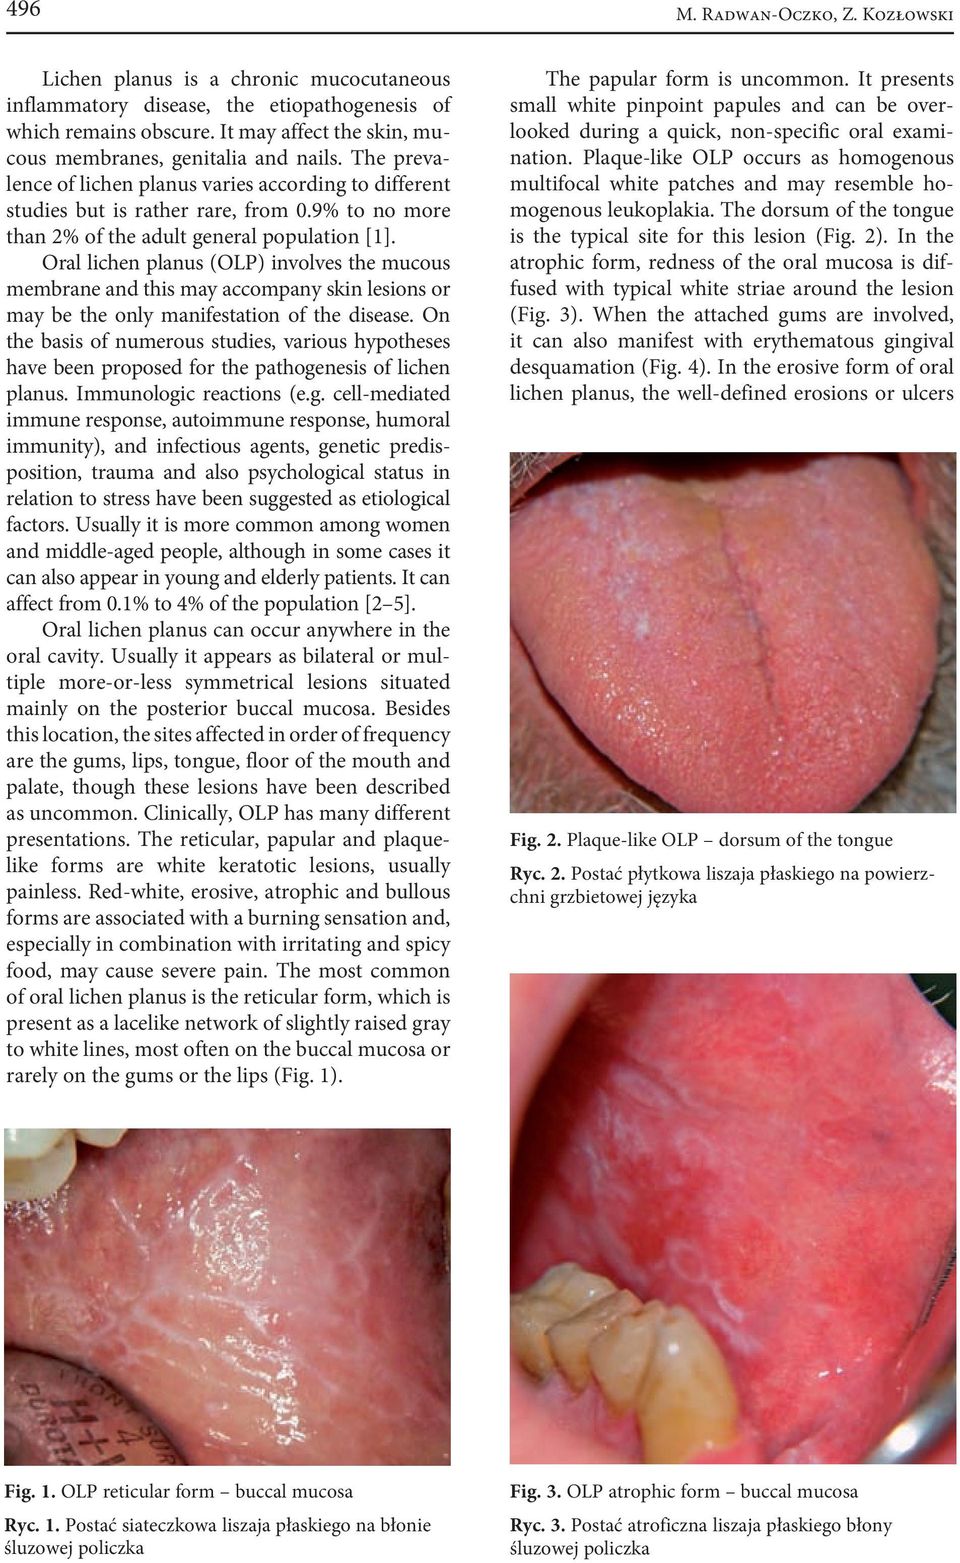 9% to no more than 2% of the adult general population [1]. Oral lichen planus (OLP) involves the mucous membrane and this may accompany skin lesions or may be the only manifestation of the disease.